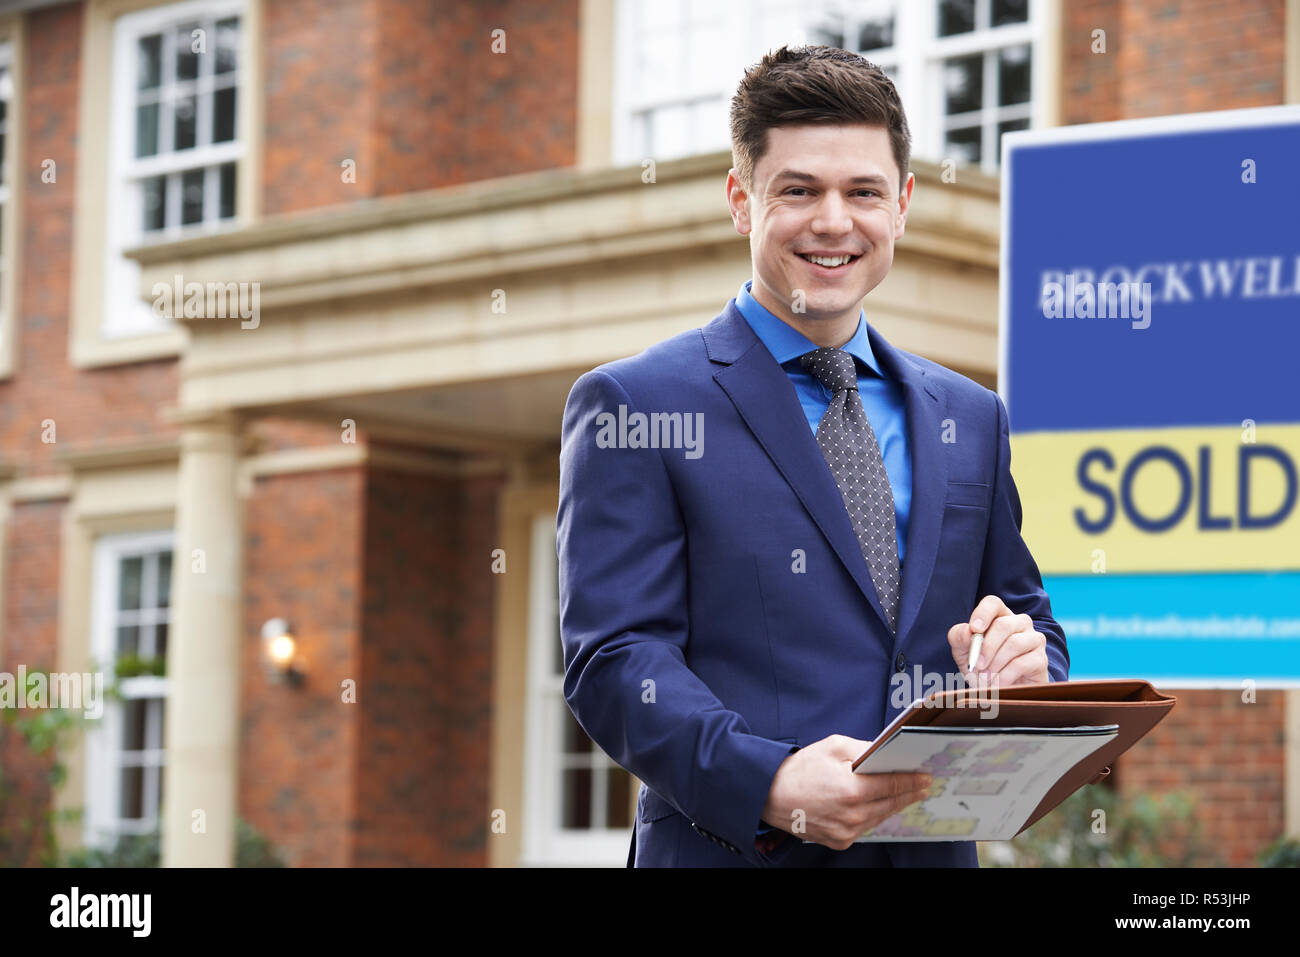 Portrait Of Male Realtor Standing Outside Residential Property With Sold Sign Stock Photo